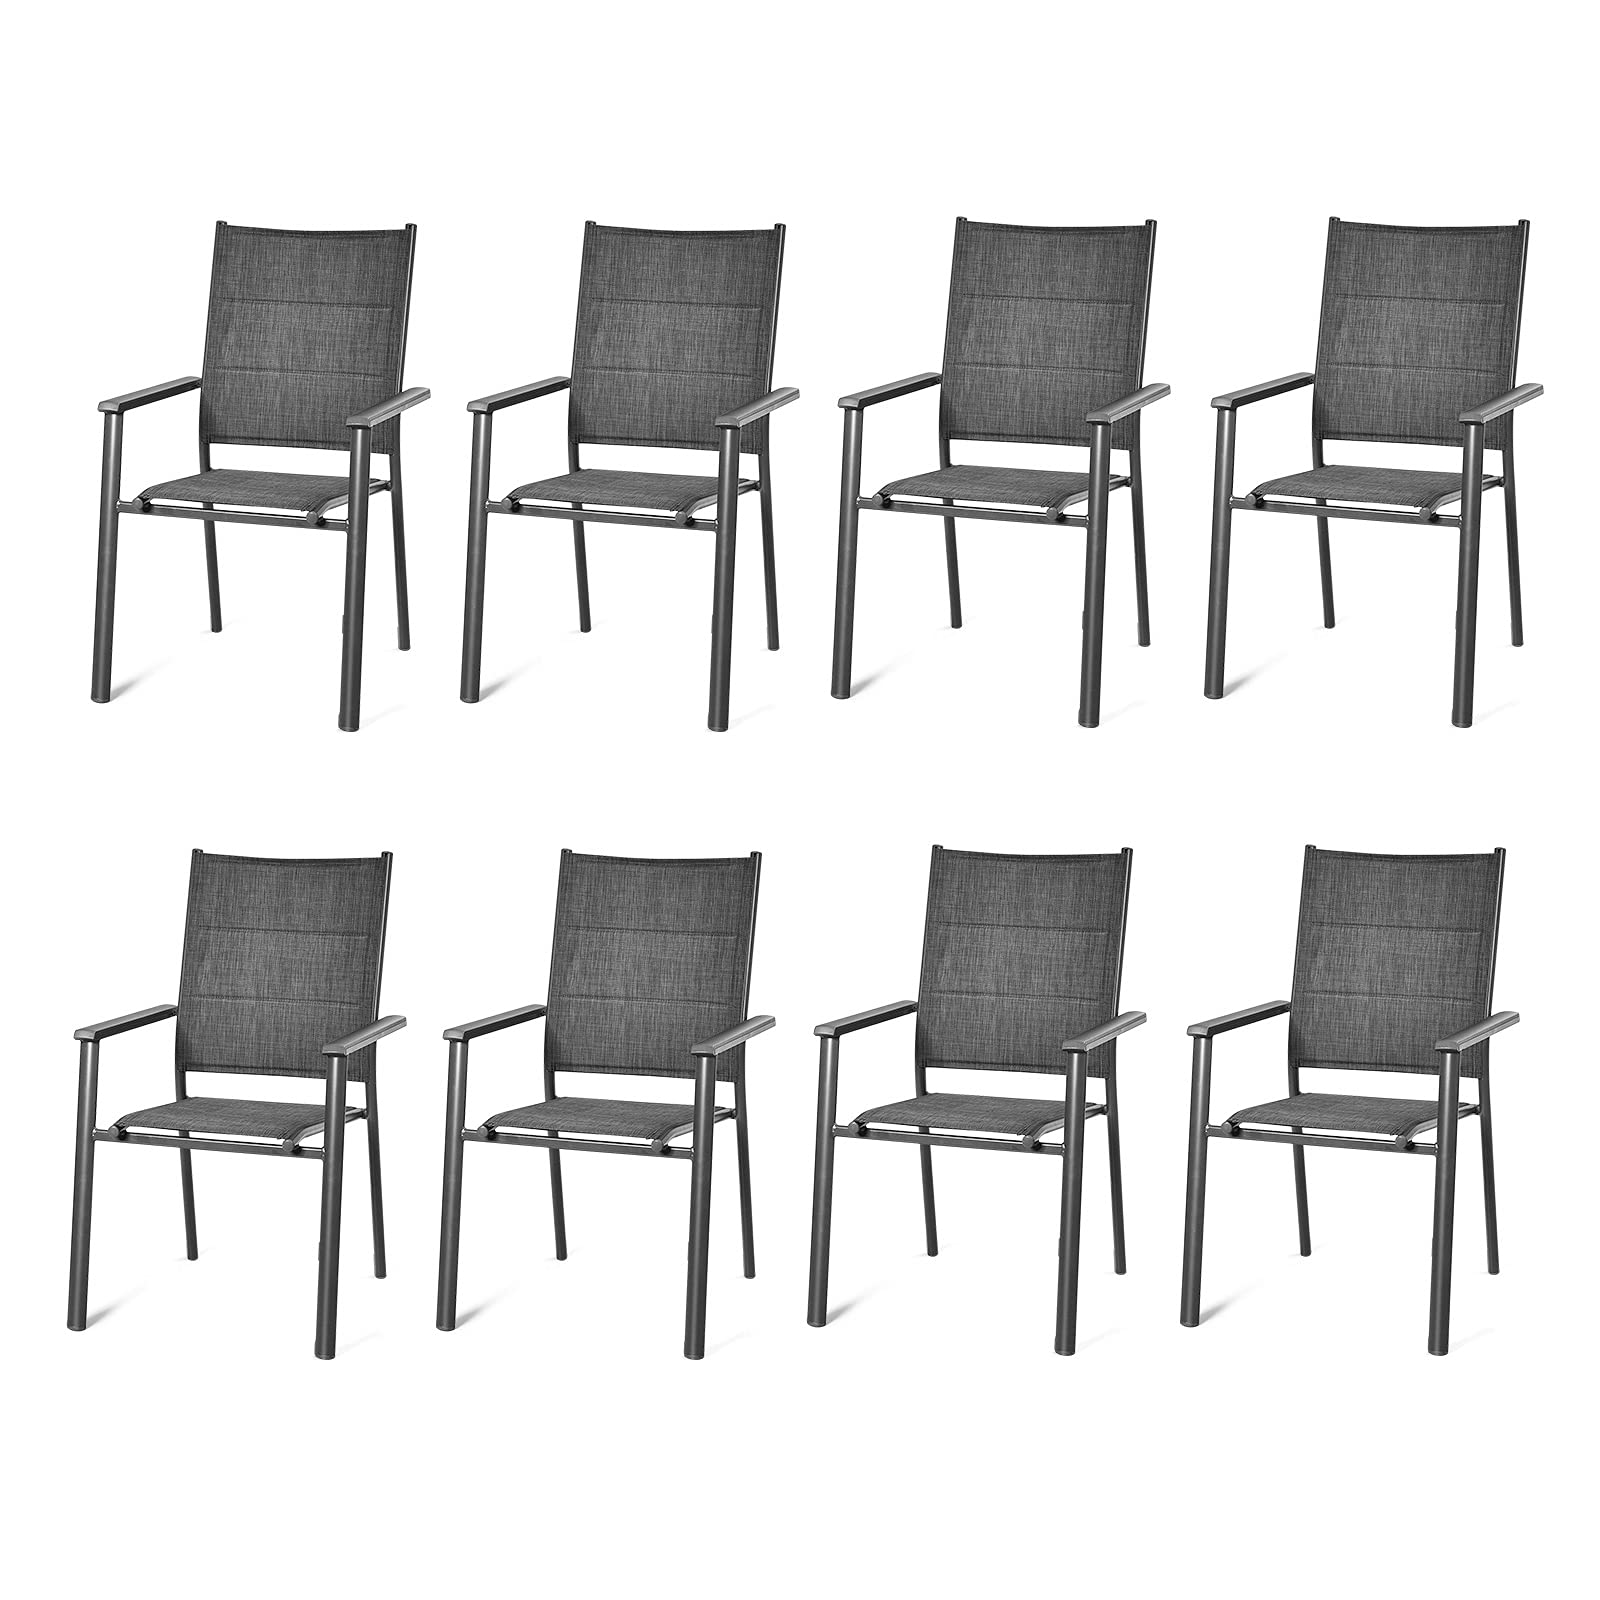 Giantex Patio Chairs, Stackable Lawn Chairs